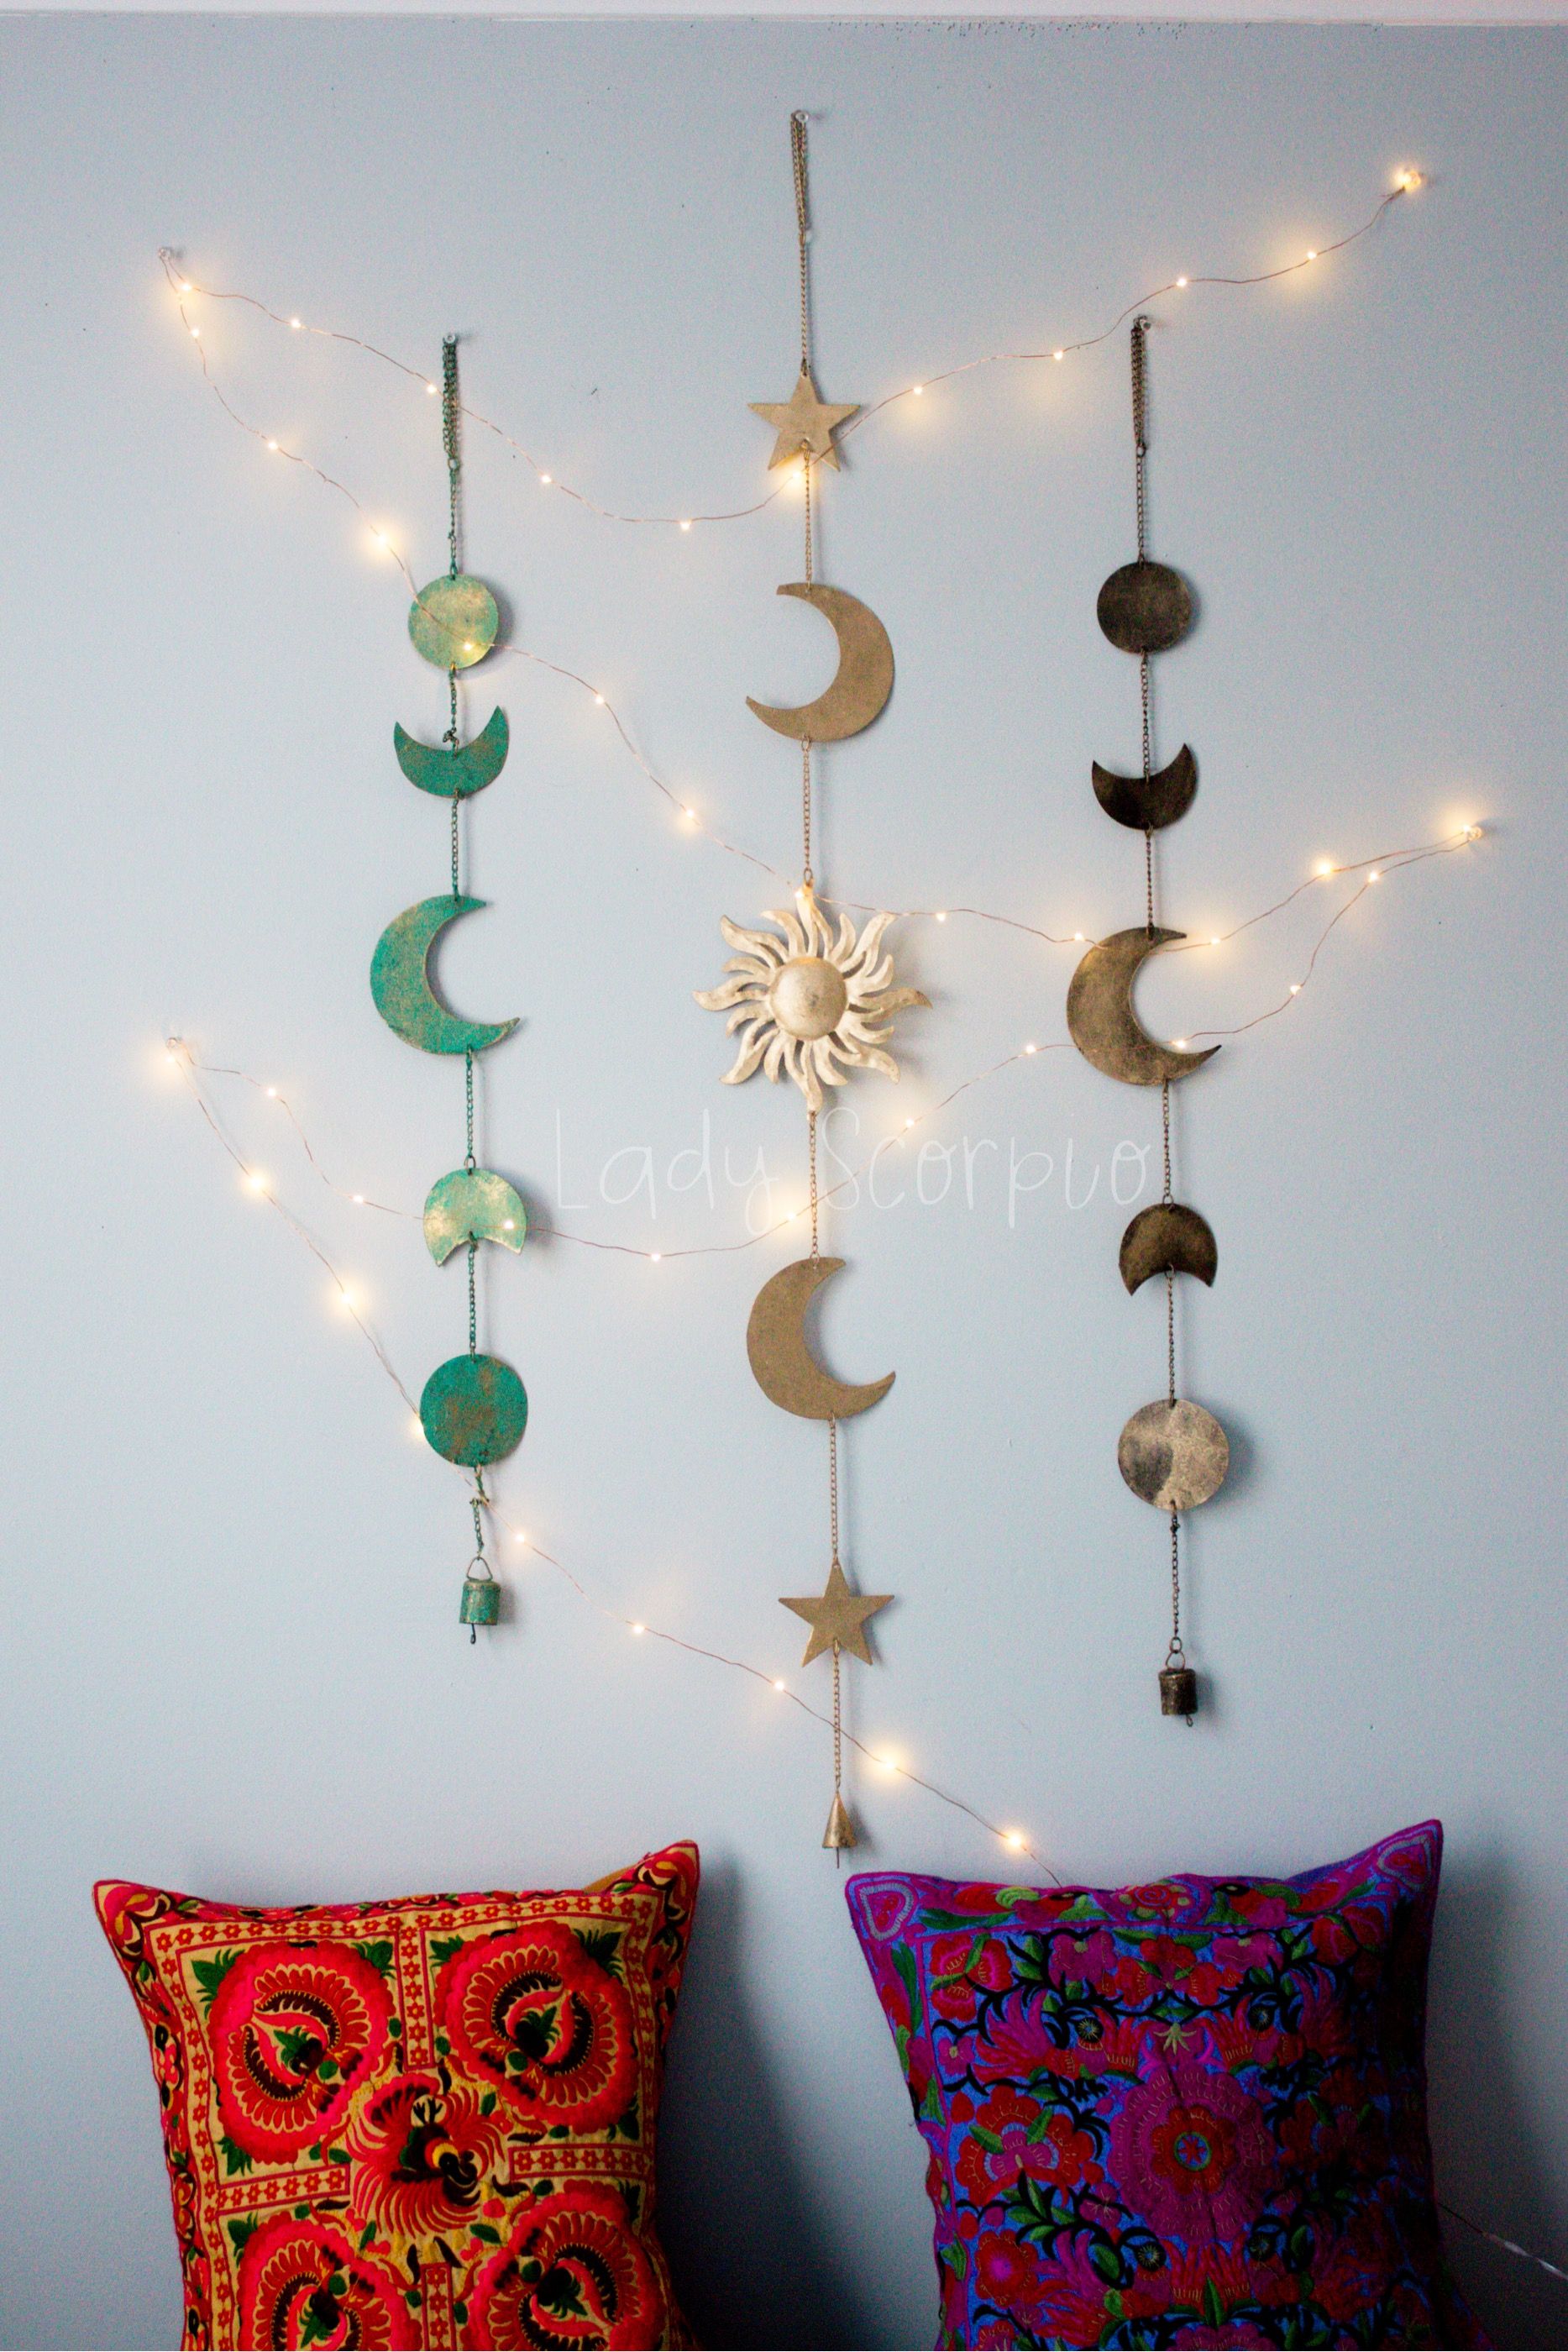 Moon Phases Wall Hanging Decor | Wall hanging decor, Star wall and ...